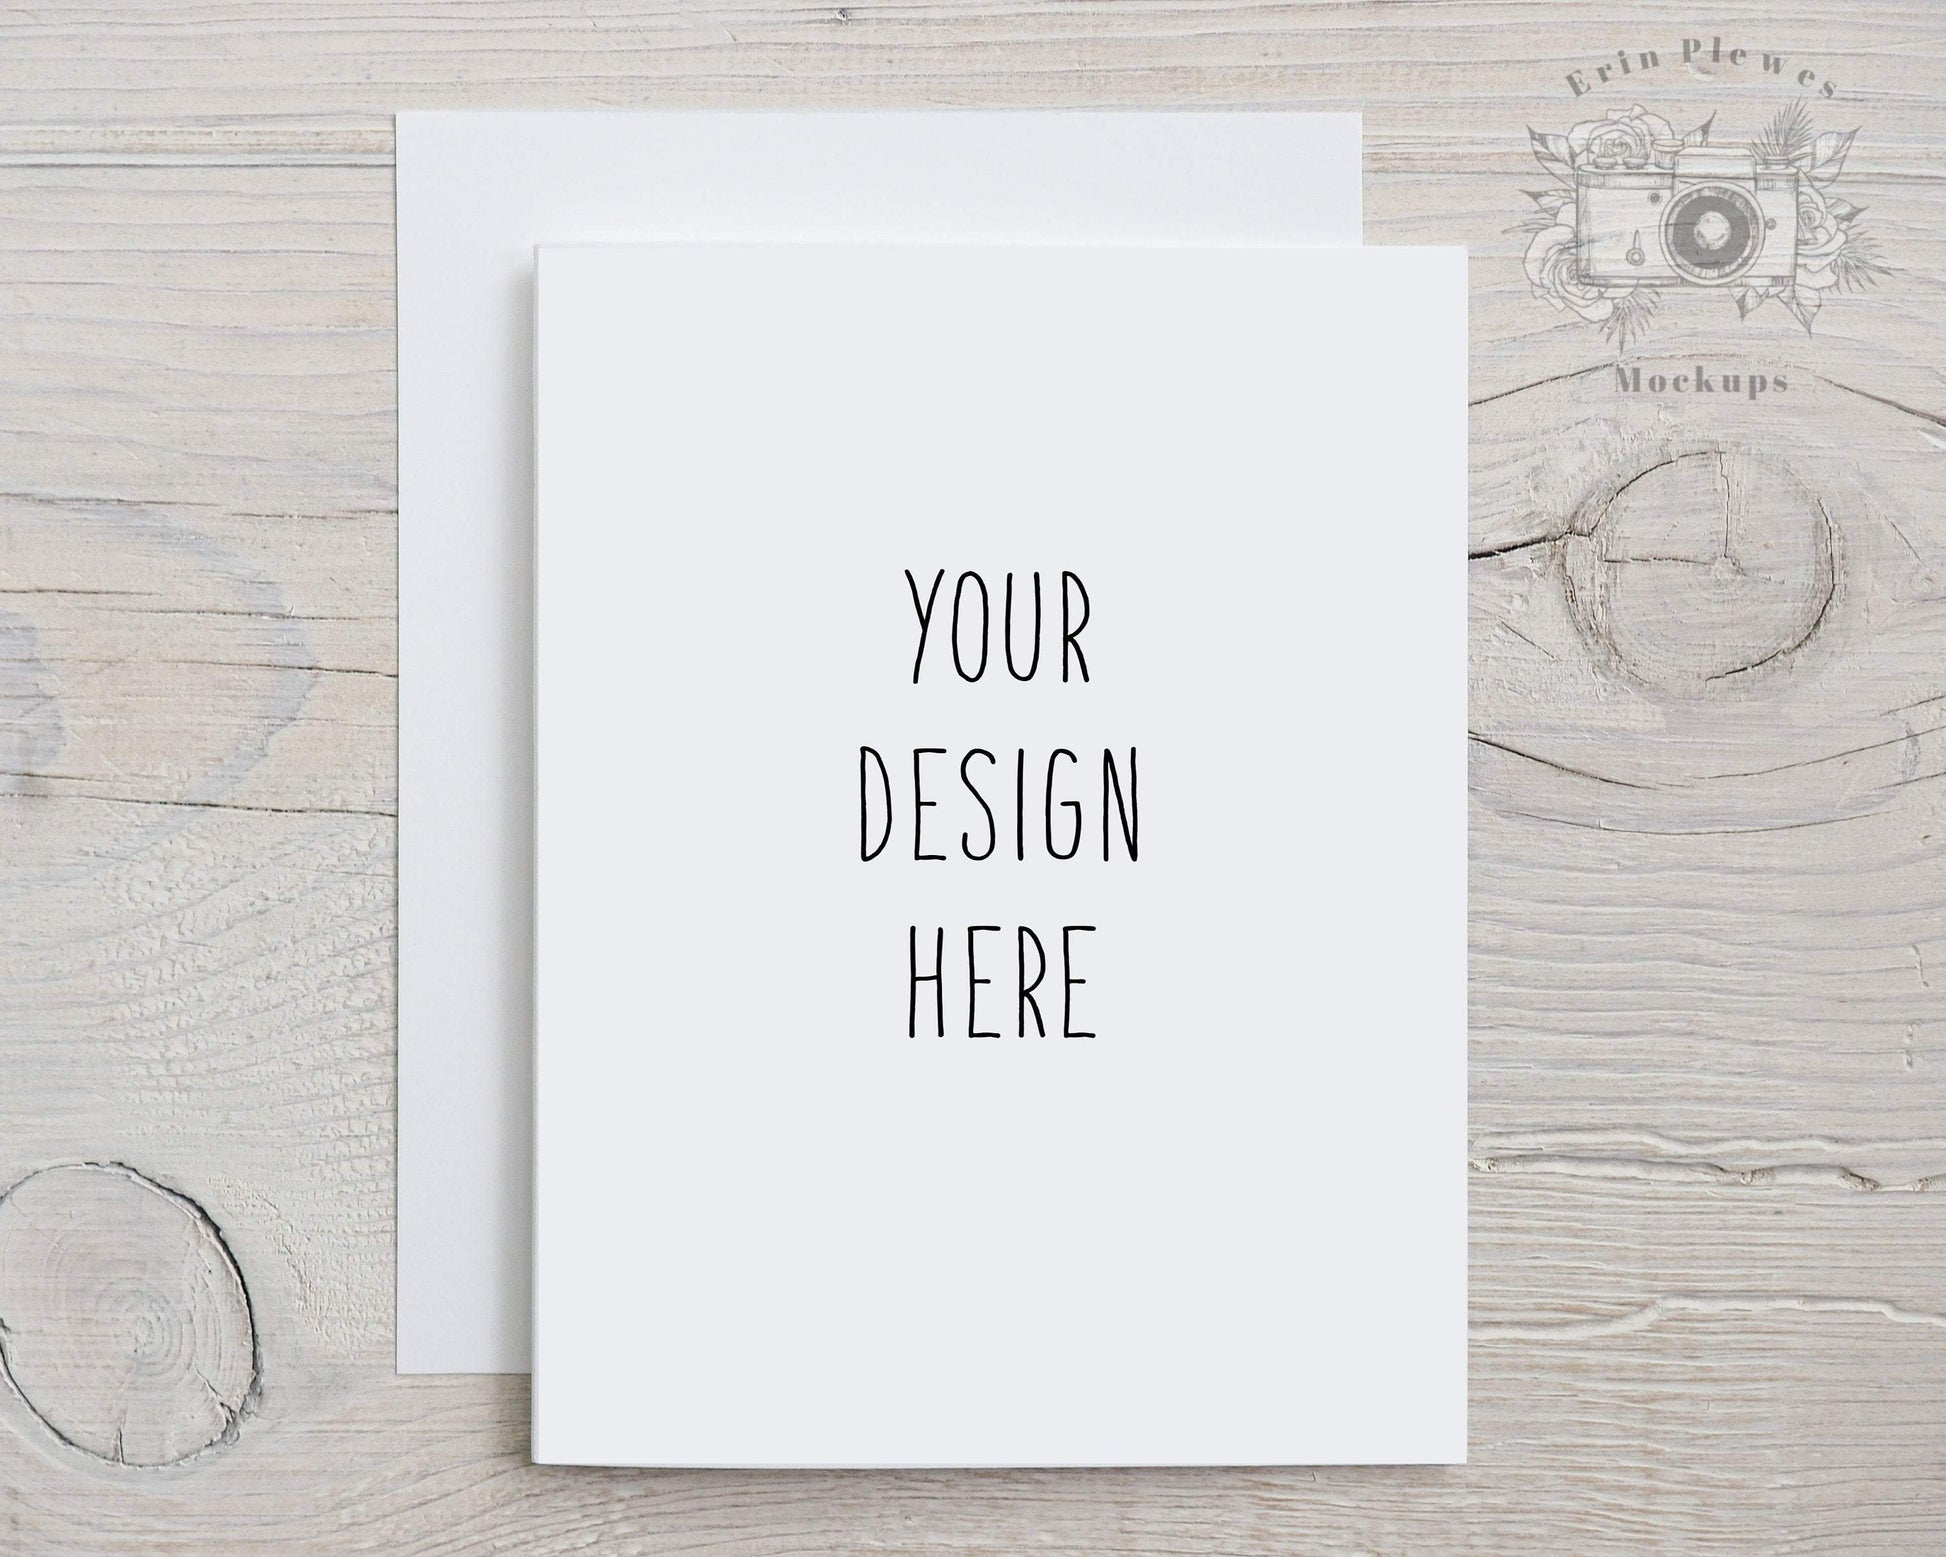 Erin Plewes Mockups Card Mockup A2, Greeting Card Mockup with White Envelope, Thank You Card Mock Up, Instant Digital Download Template